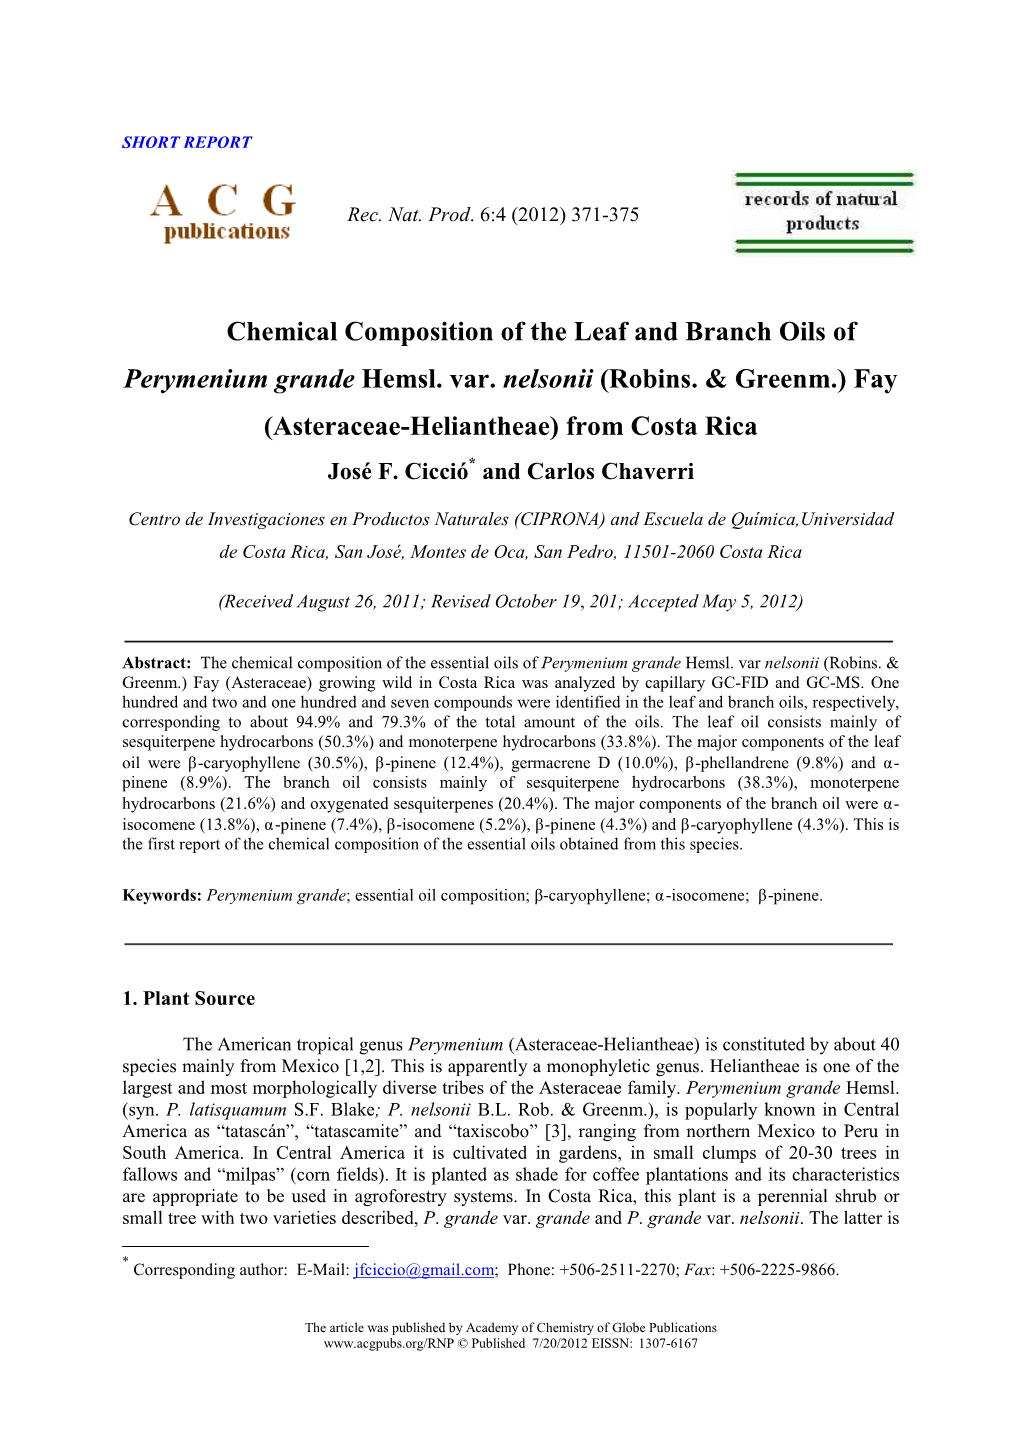 Chemical Composition of the Leaf and Branch Oils of Perymenium Grande Hemsl